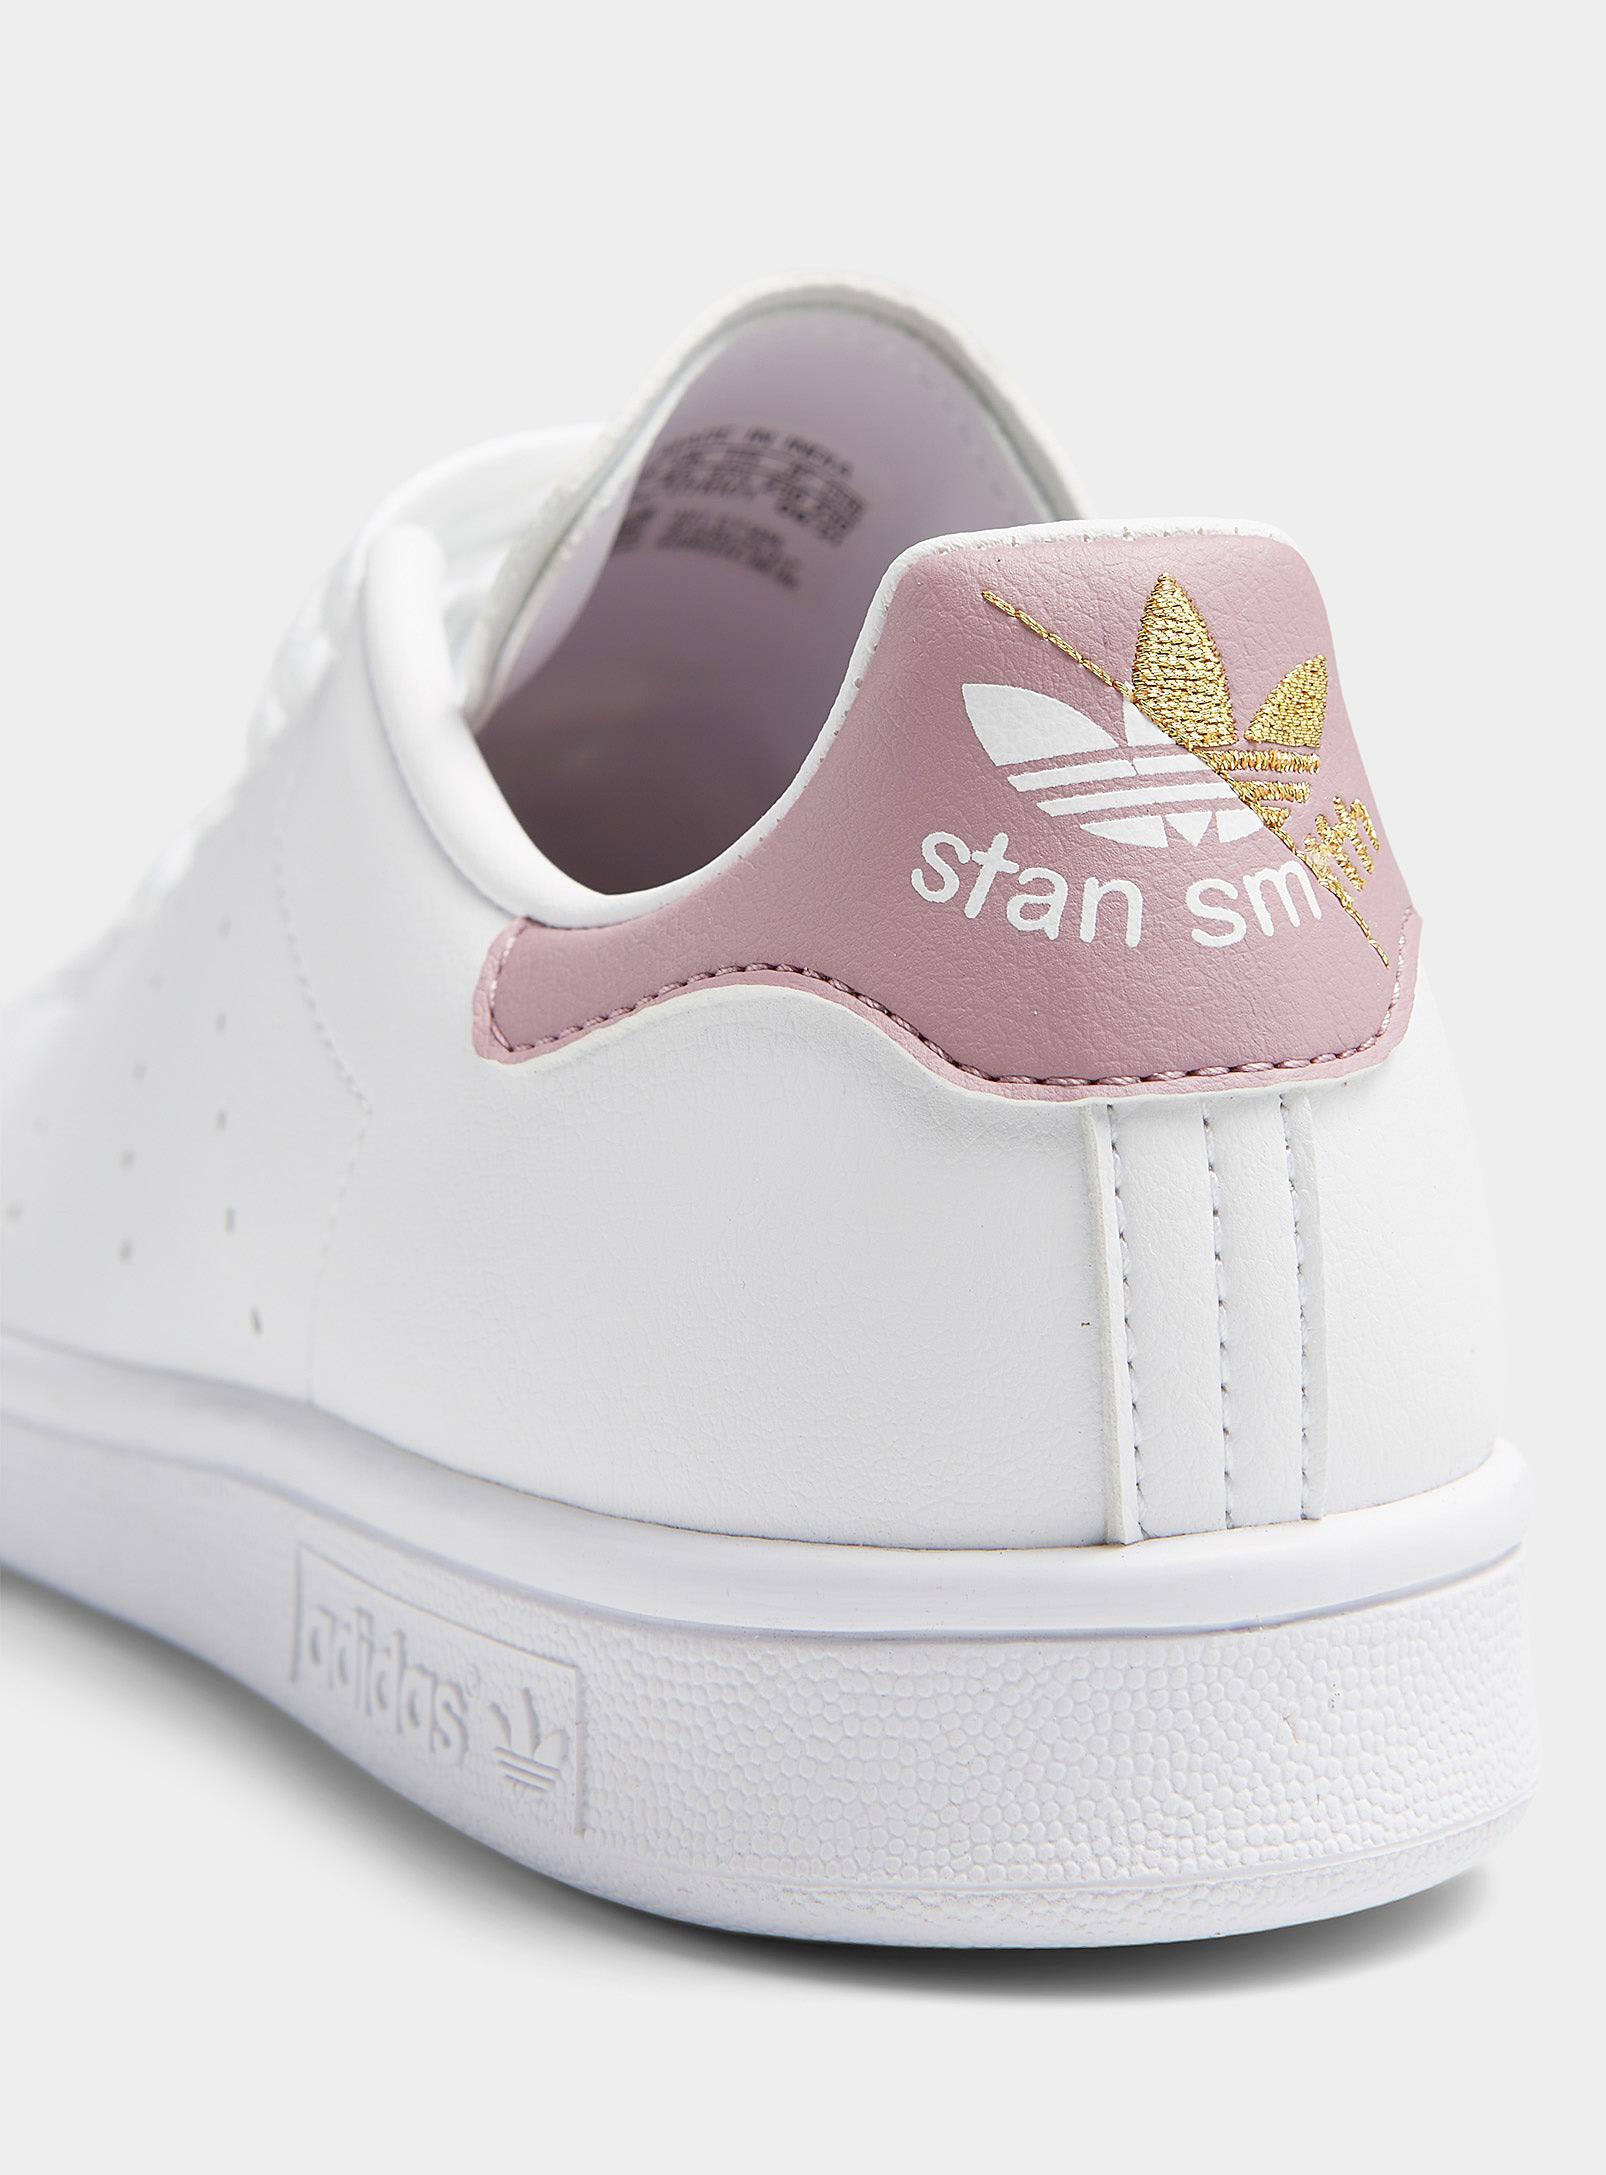 Skære af frokost hykleri adidas Originals Stan Smith Pink And Gold Sneakers Women in White | Lyst